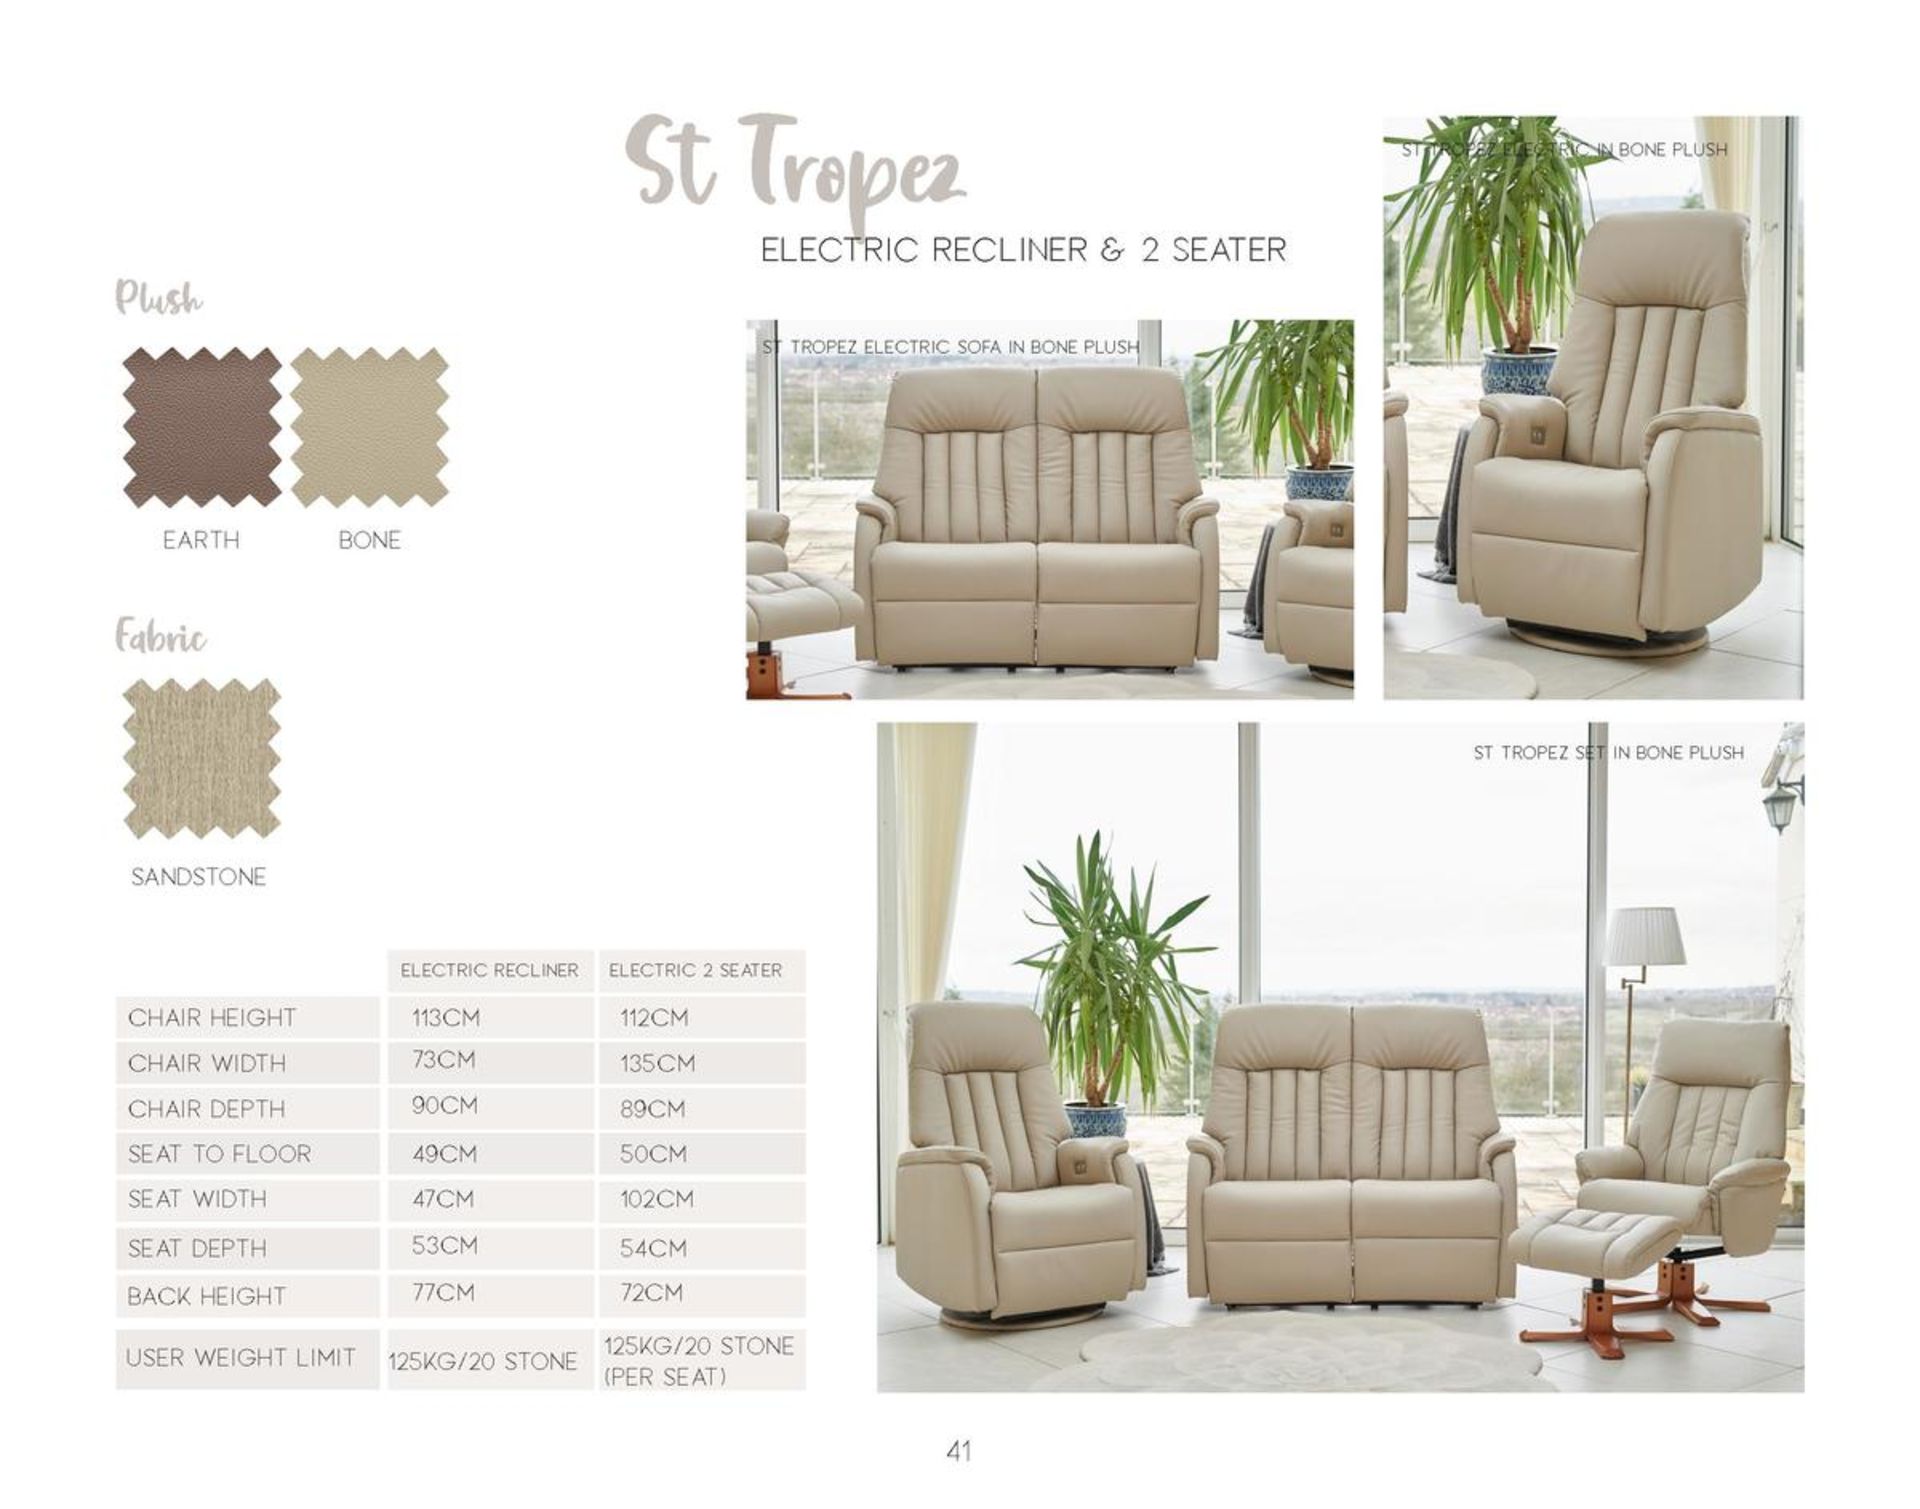 Brand New Boxed St Tropez Electric Reclining 2 Seater Sofa In Bone Colour